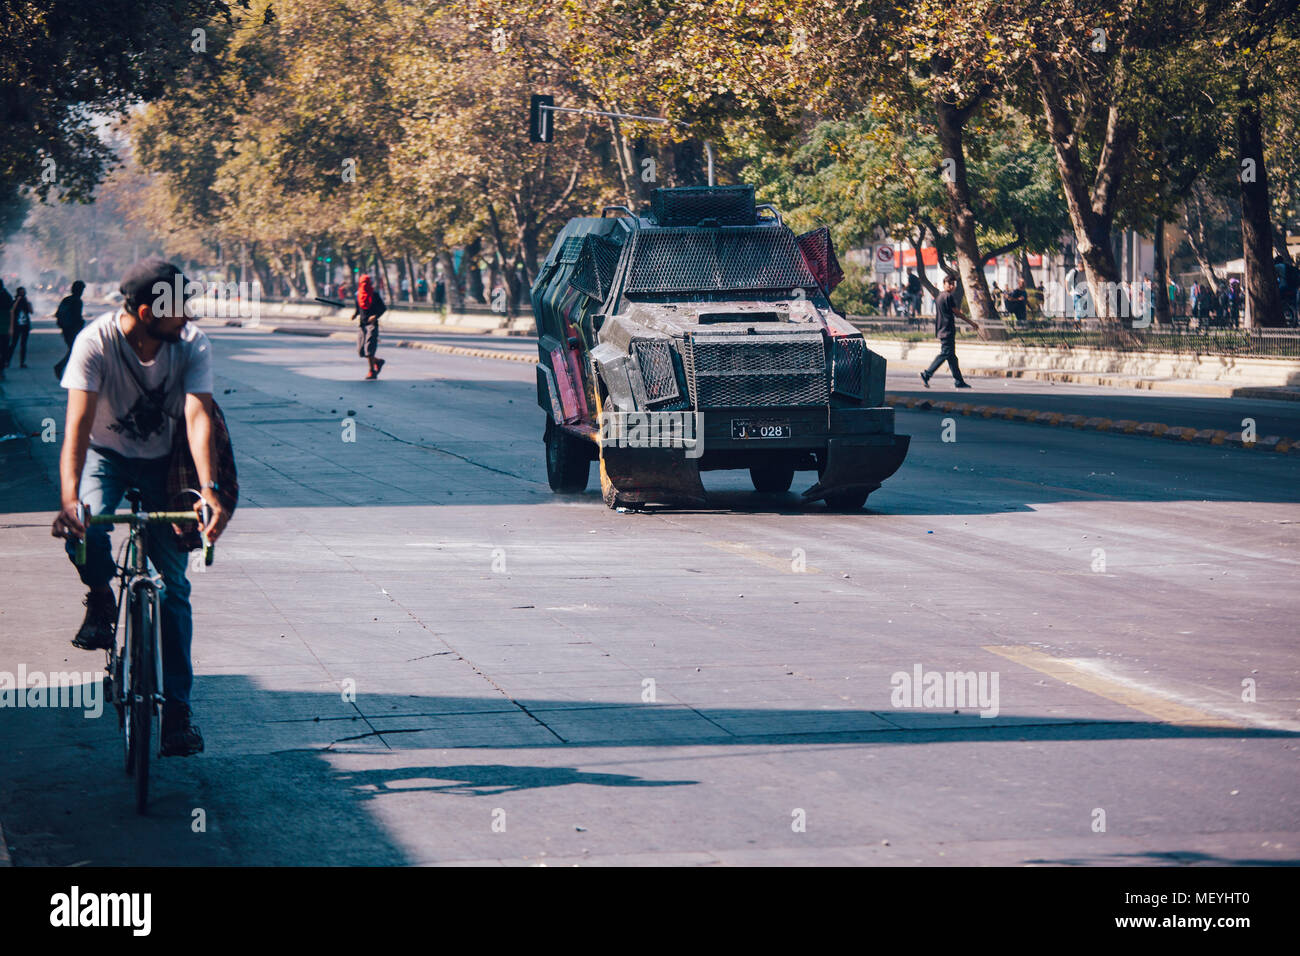 Santiago, Chile - April 19, 2018:  Riot police vehicle patrol the streets during a demonstration demanding an end to the Profit in the Education. Stock Photo